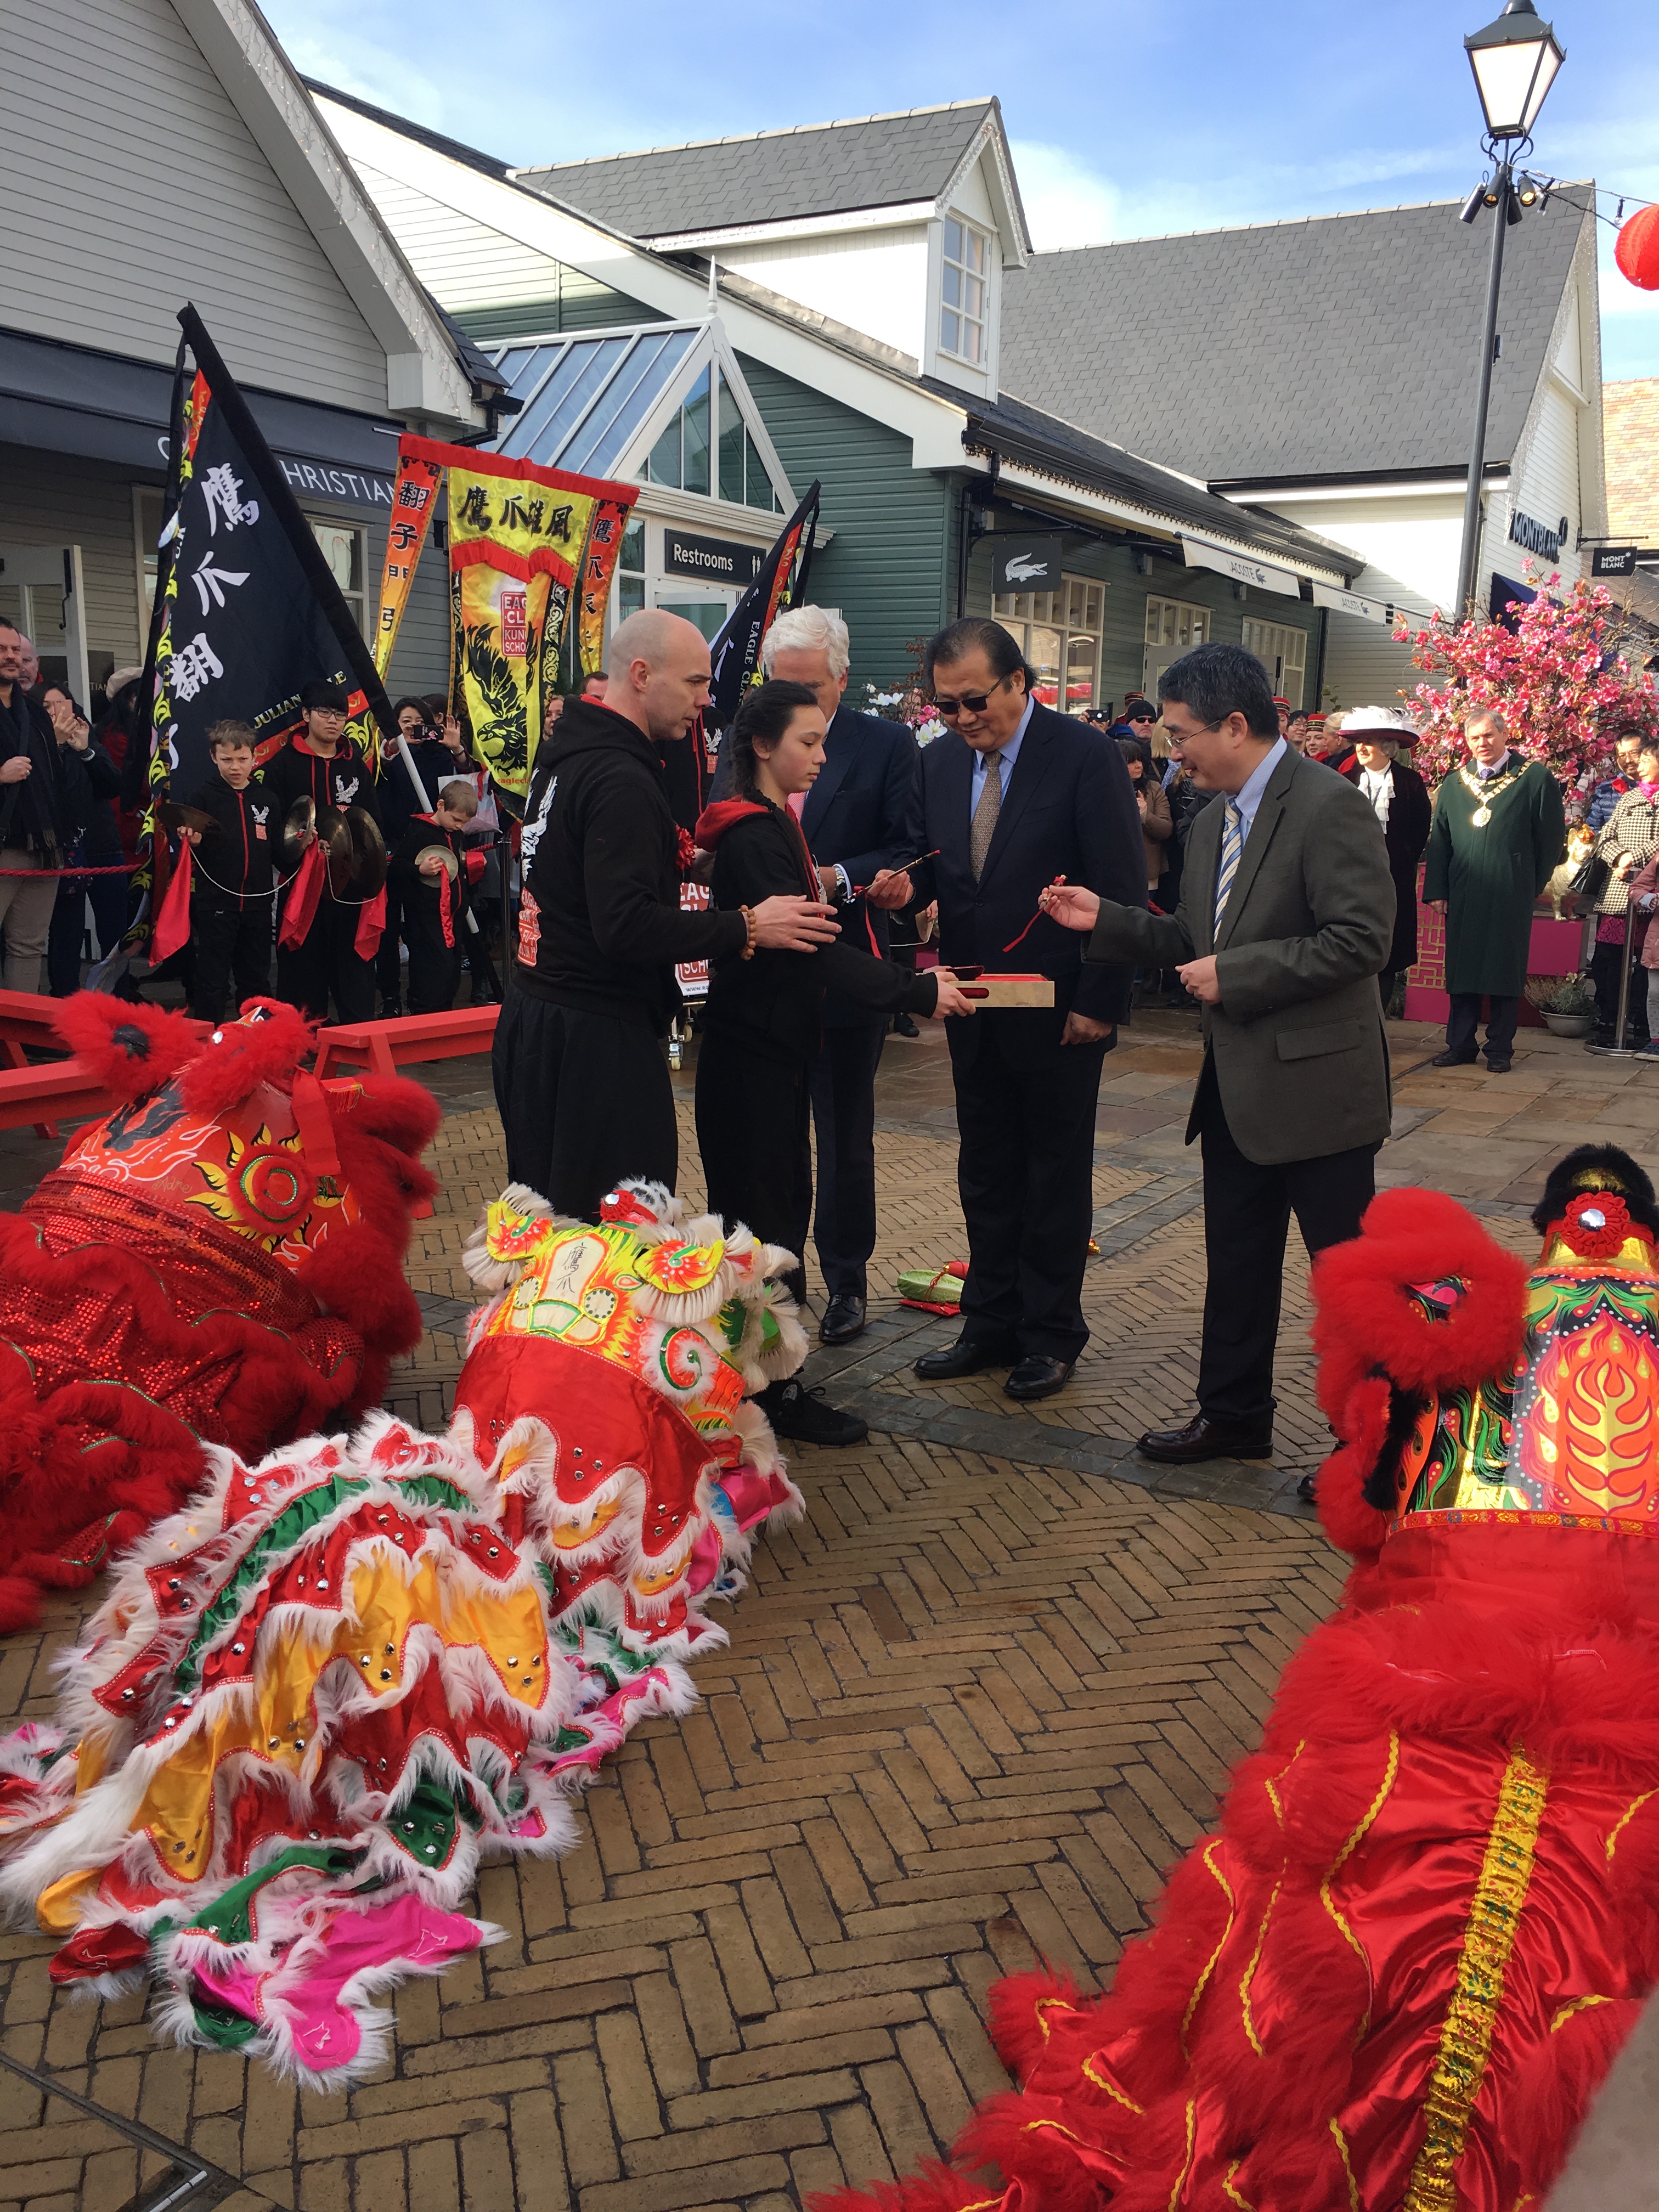 The eye dotting ceremony celebrating Chinese New Year in Bicester Village, Feb. 16 2018.